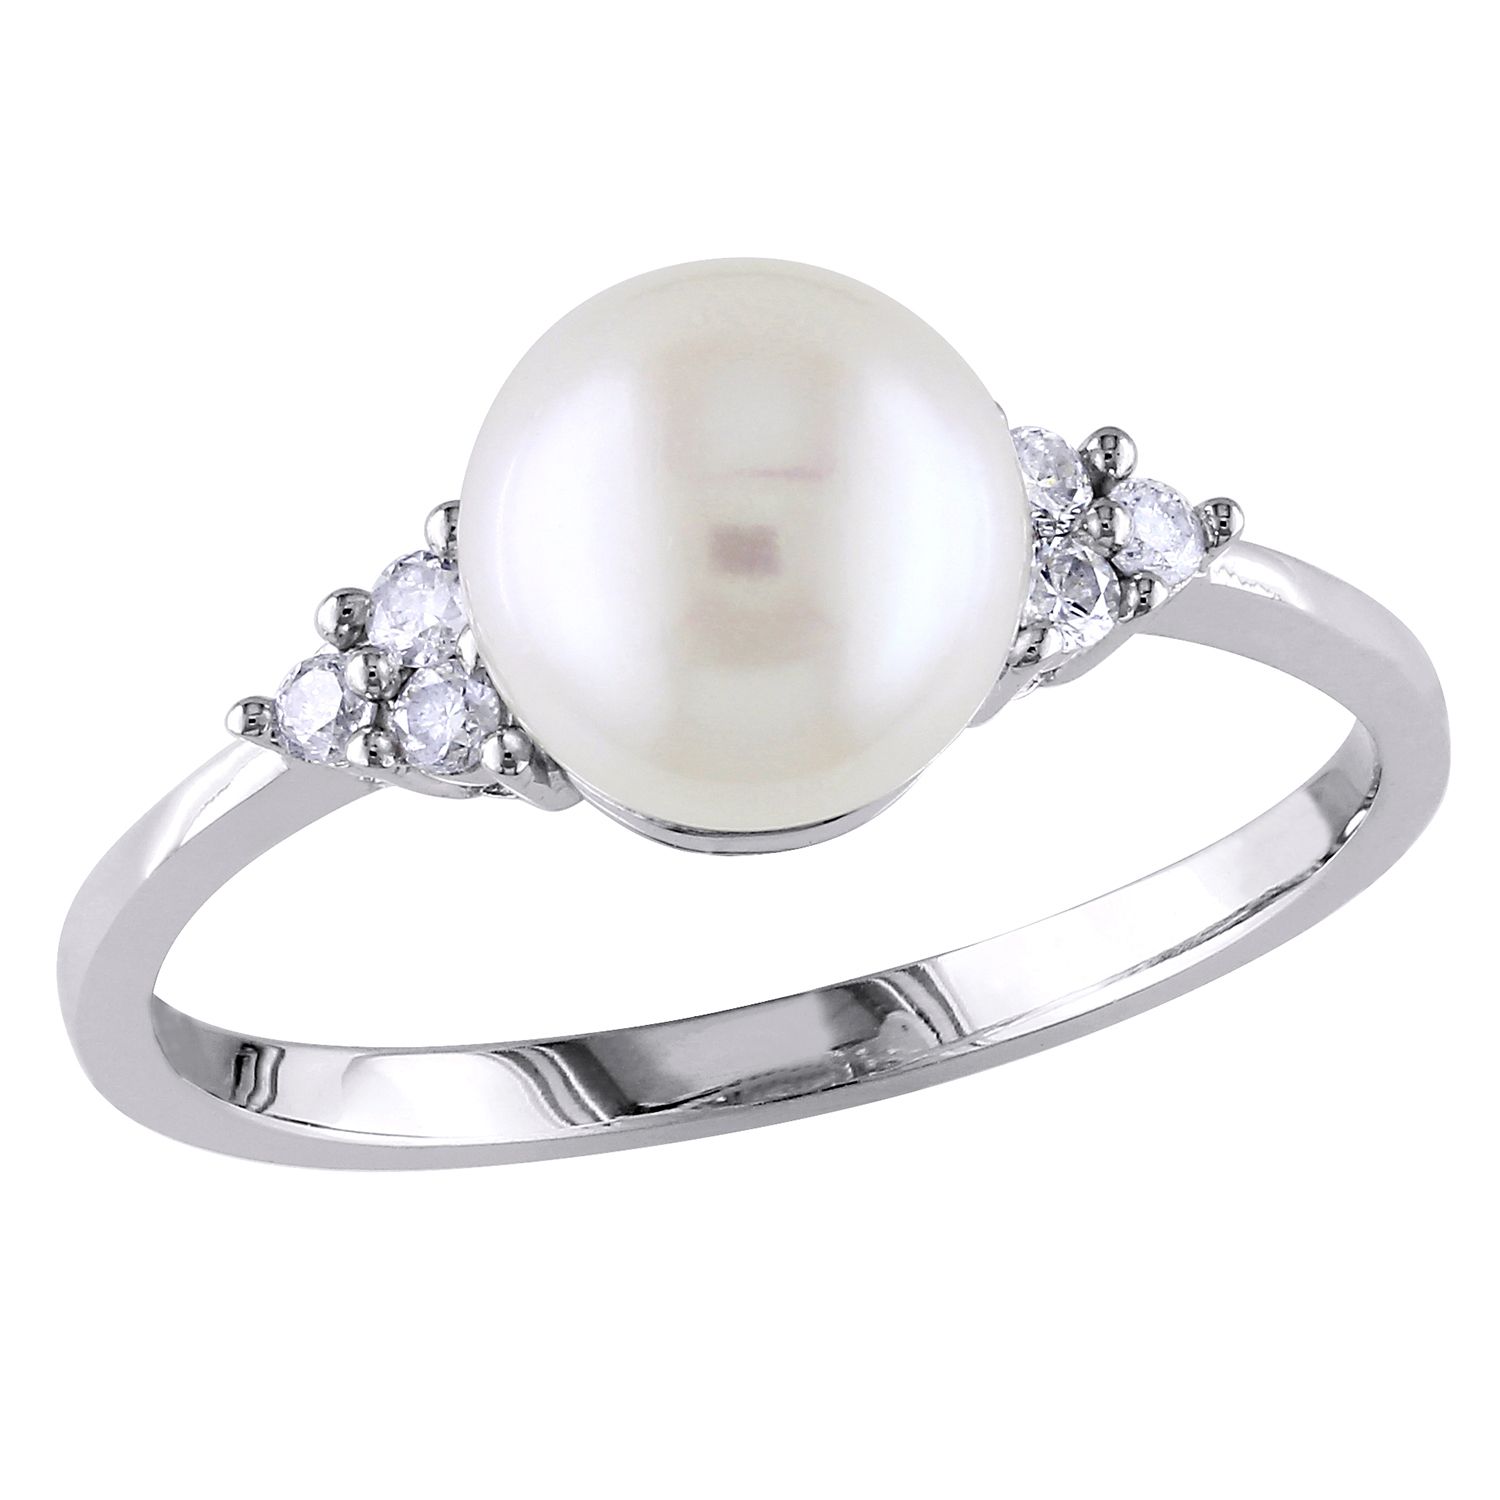 #8 sent by random 11-12mm freshwater pearl white gold plated ring US size #6 